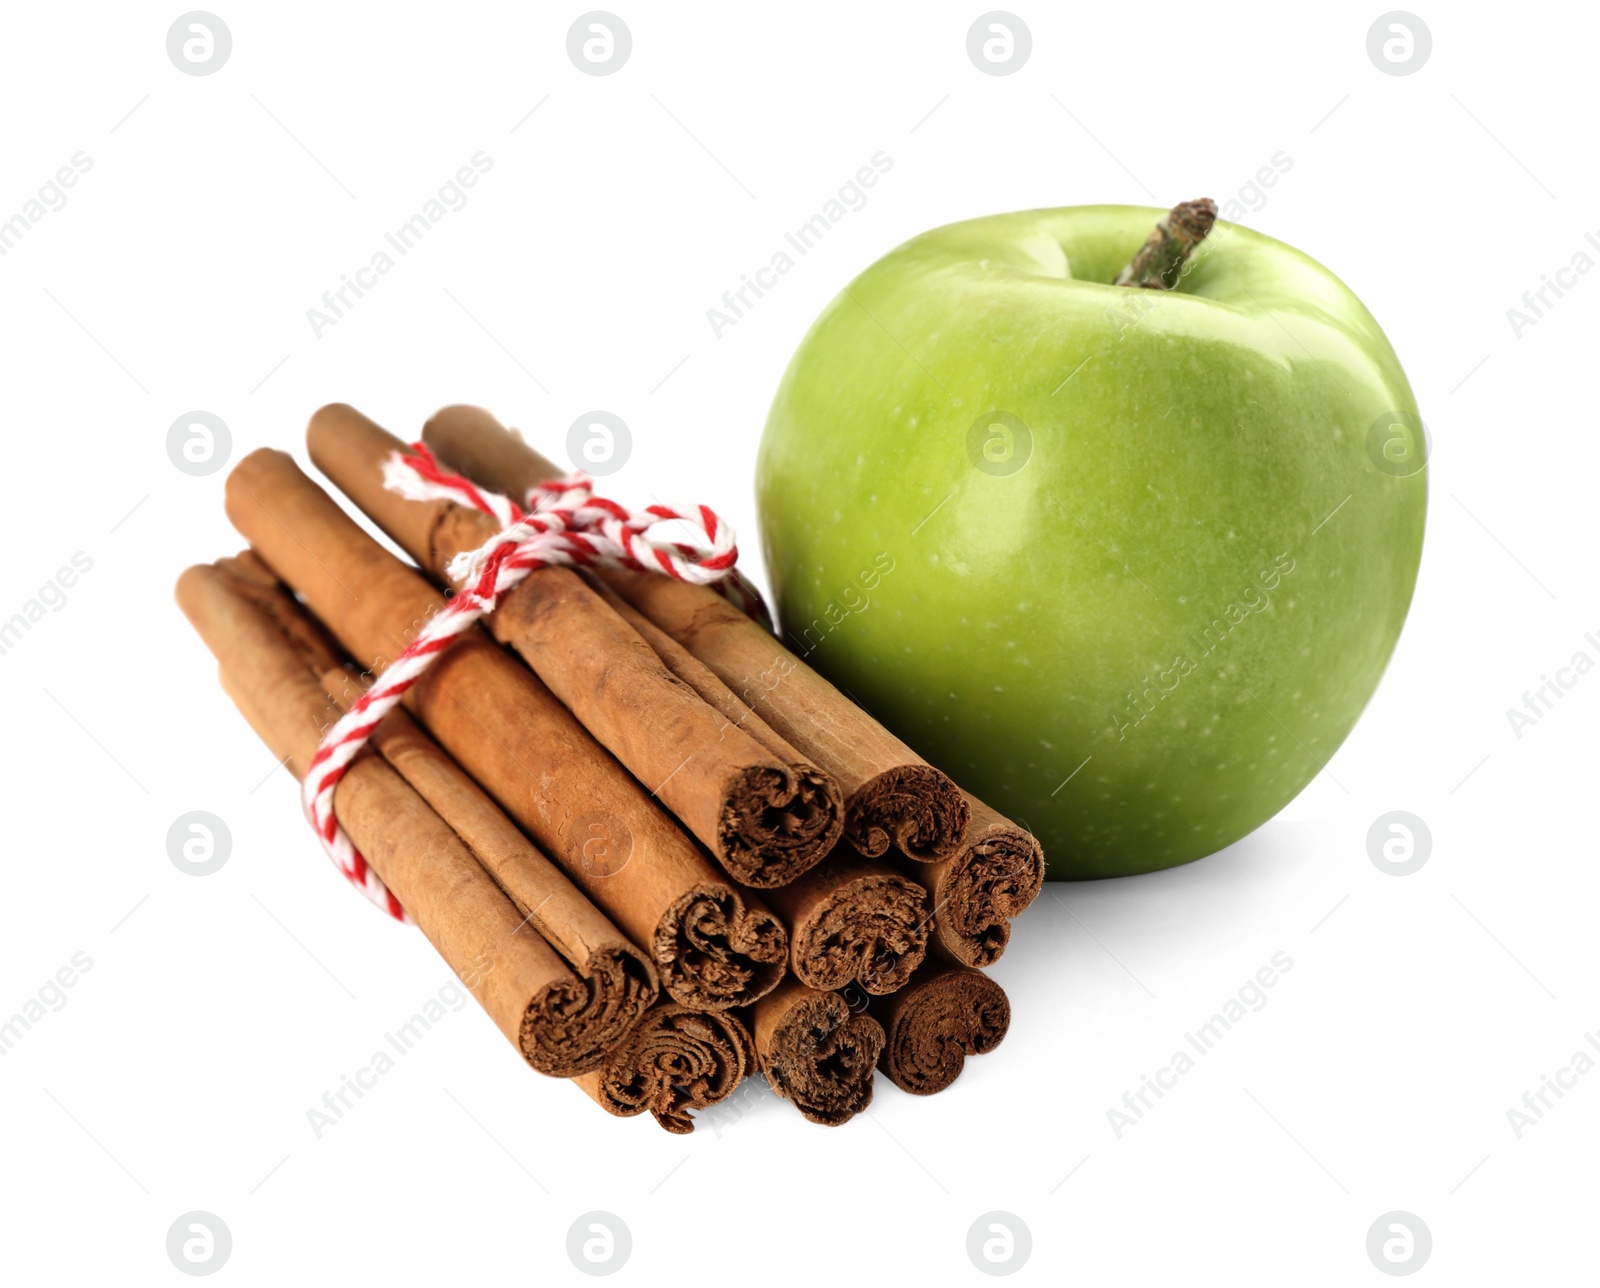 Photo of Cinnamon sticks and green apple on white background